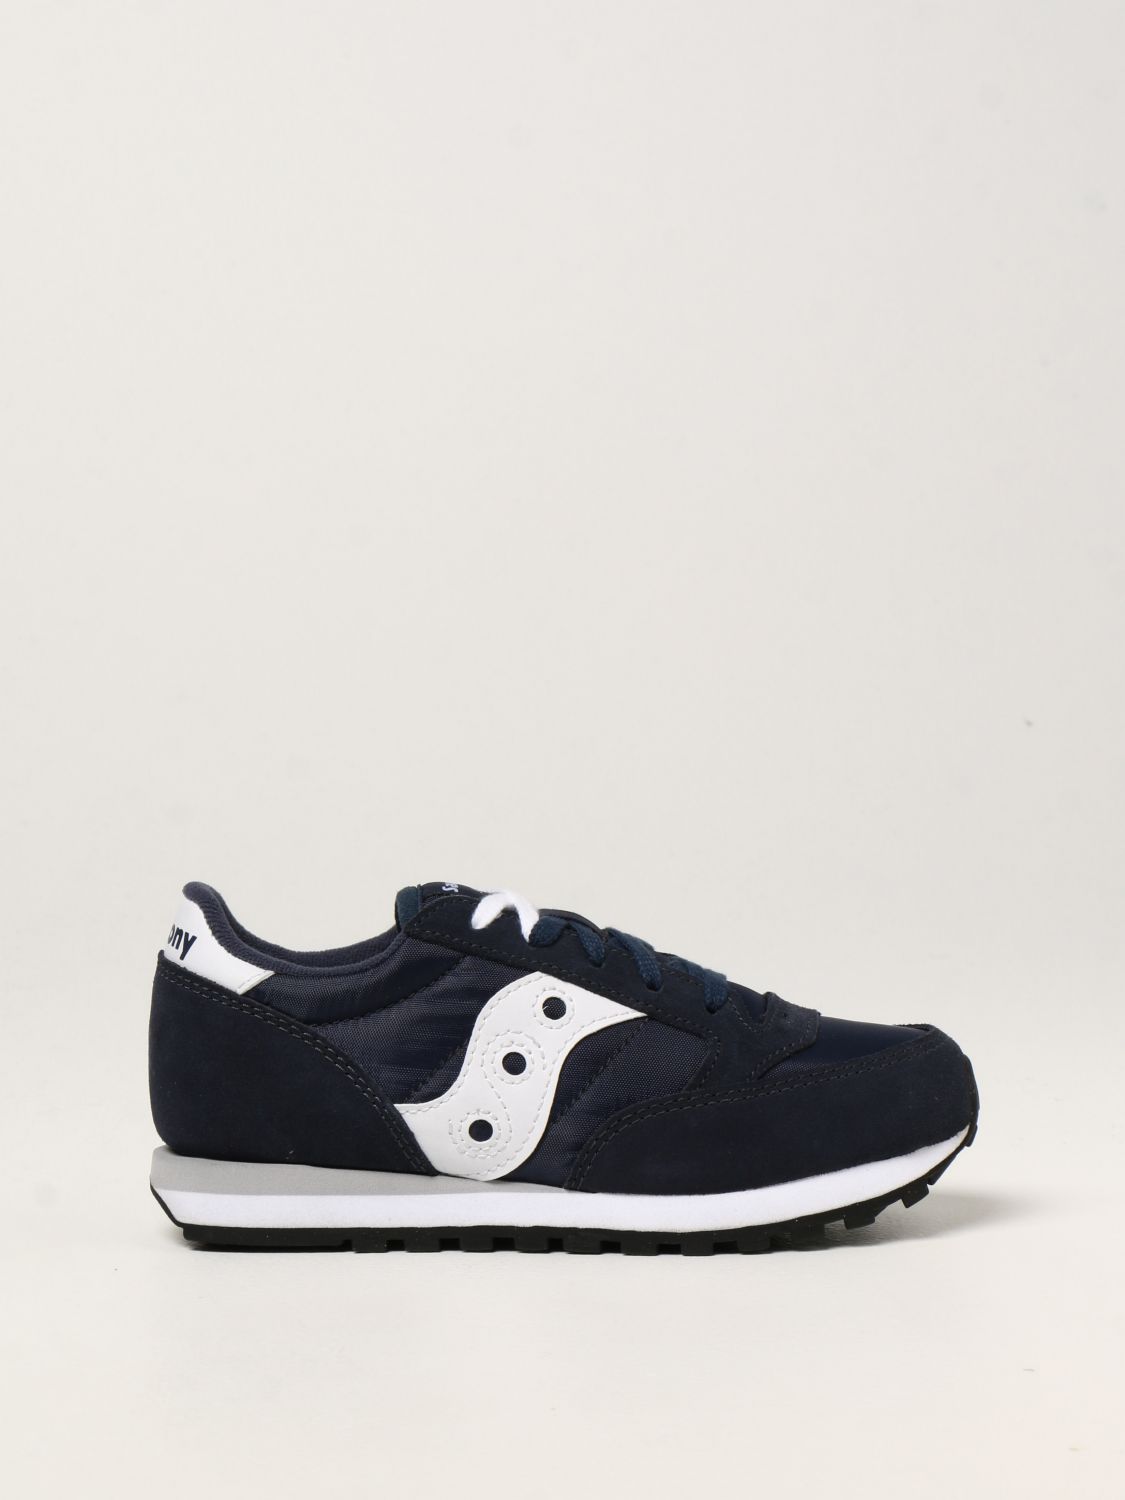 saucony shoes brand